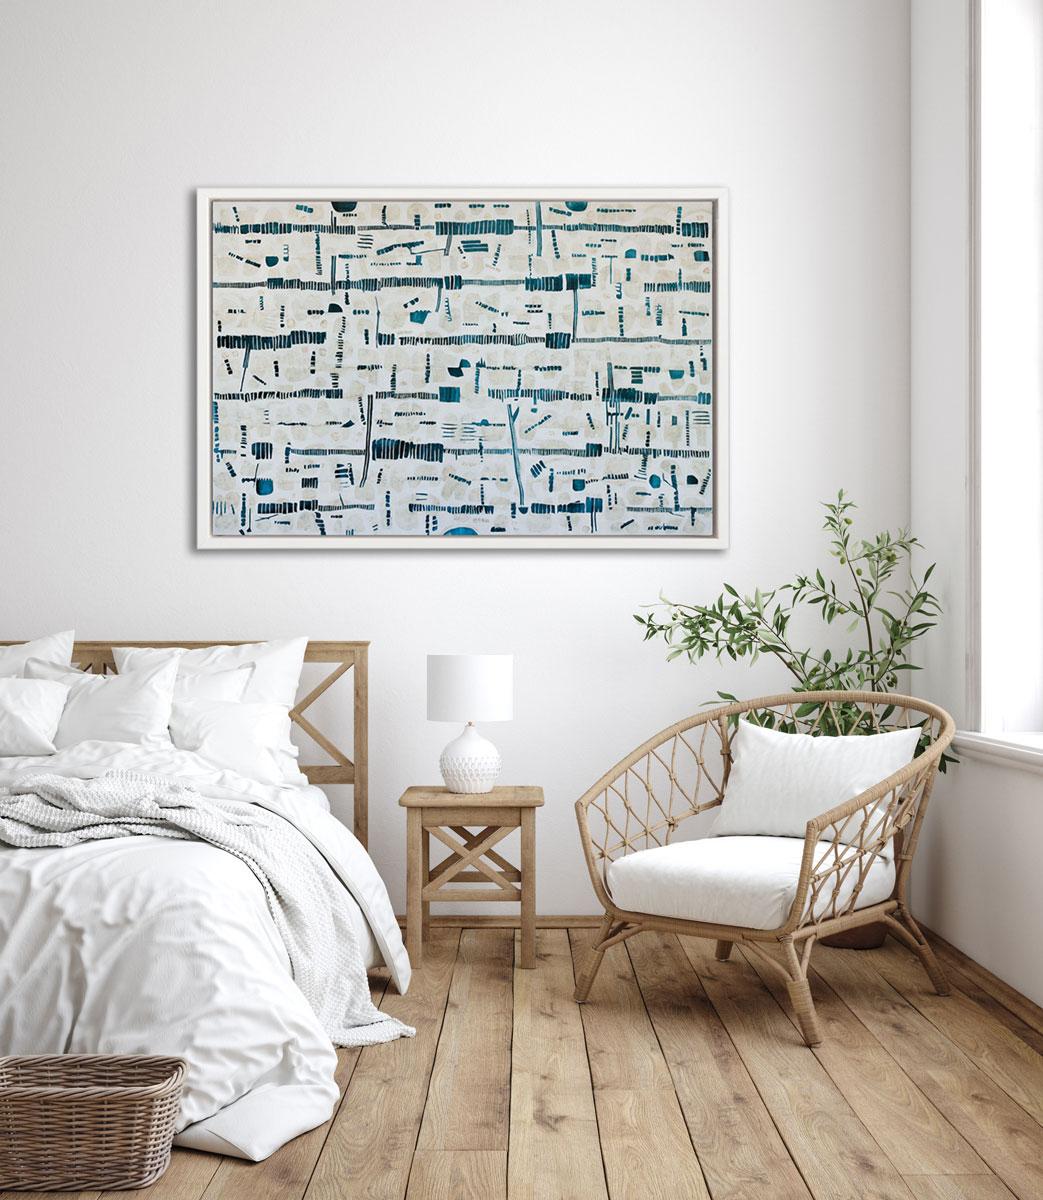 This Limited Edition abstract print by Sofie Swann is an edition of 95. Printed on canvas, this print ships rolled with natural canvas edges and can be stretched upon arrival - please see image of the print on wall to show how it would look after